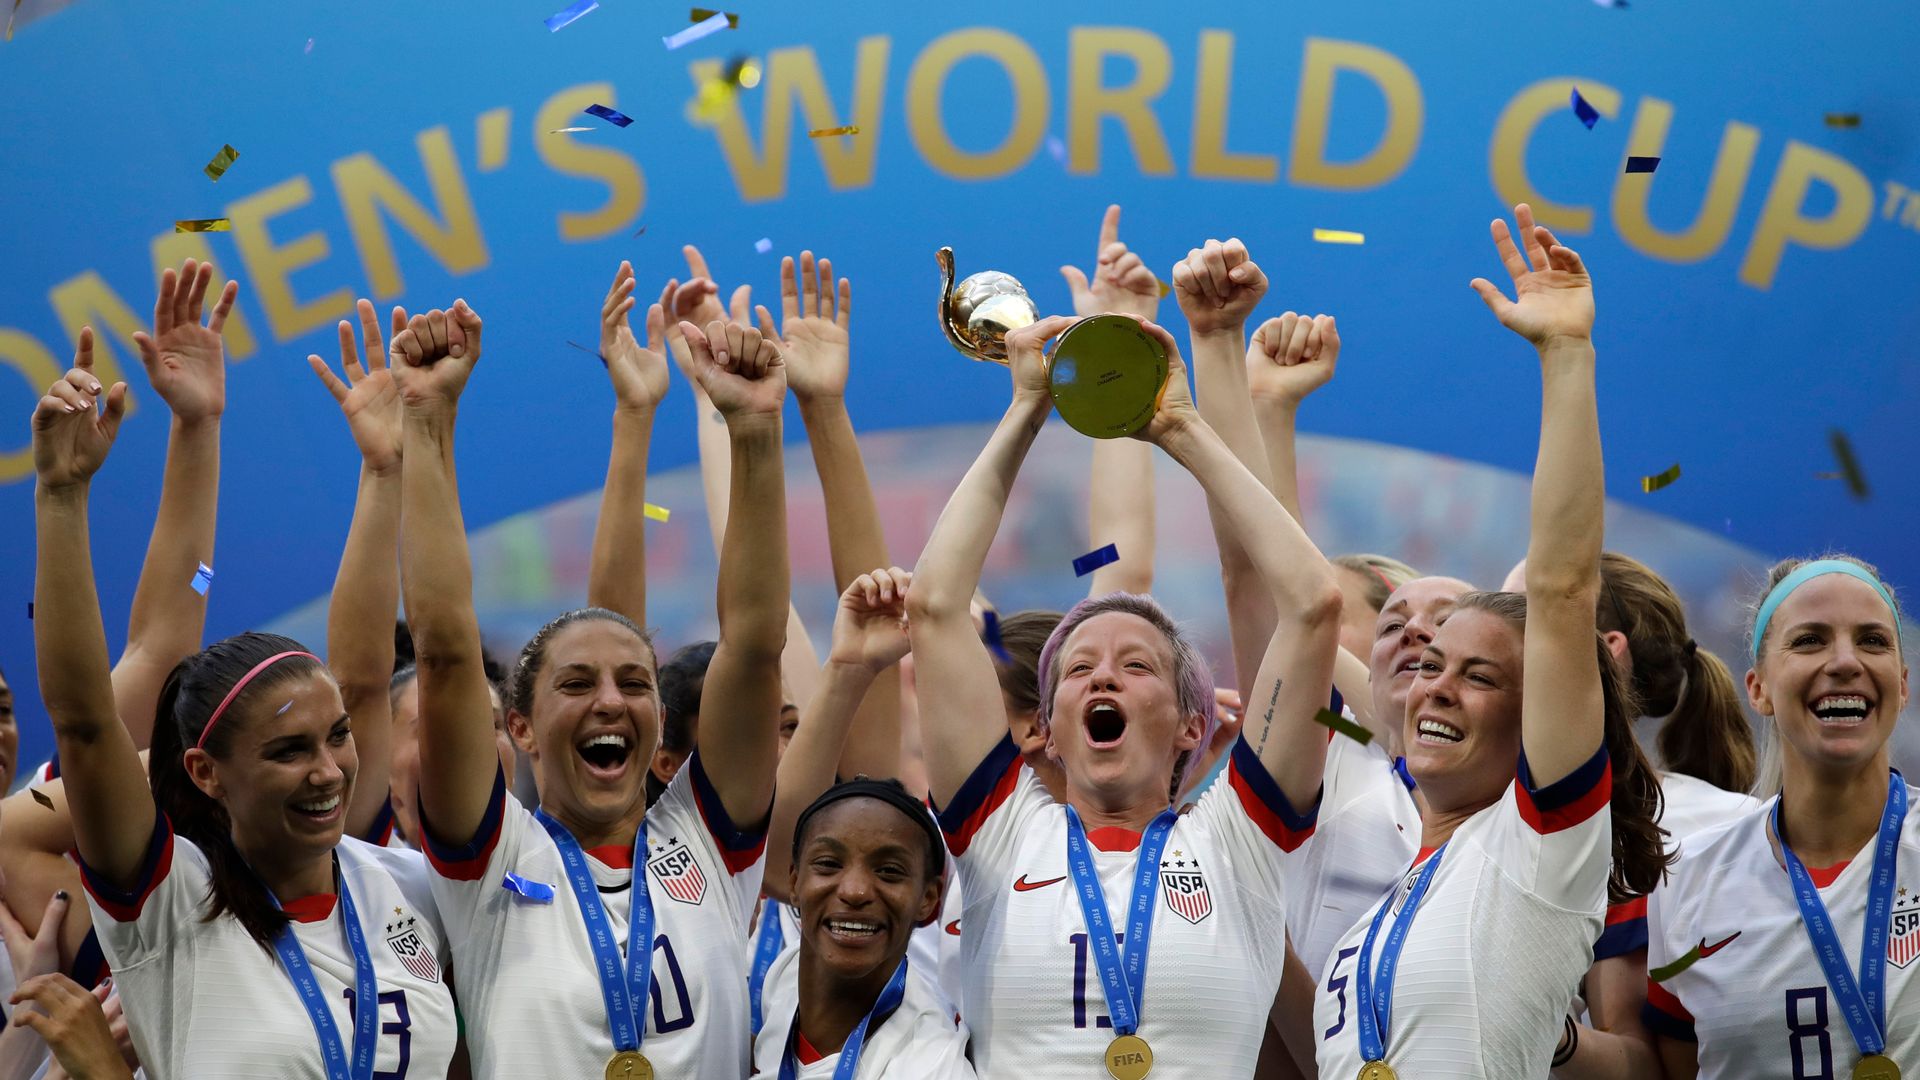 Women's World Cup prize money to match men's by 2027 tournament